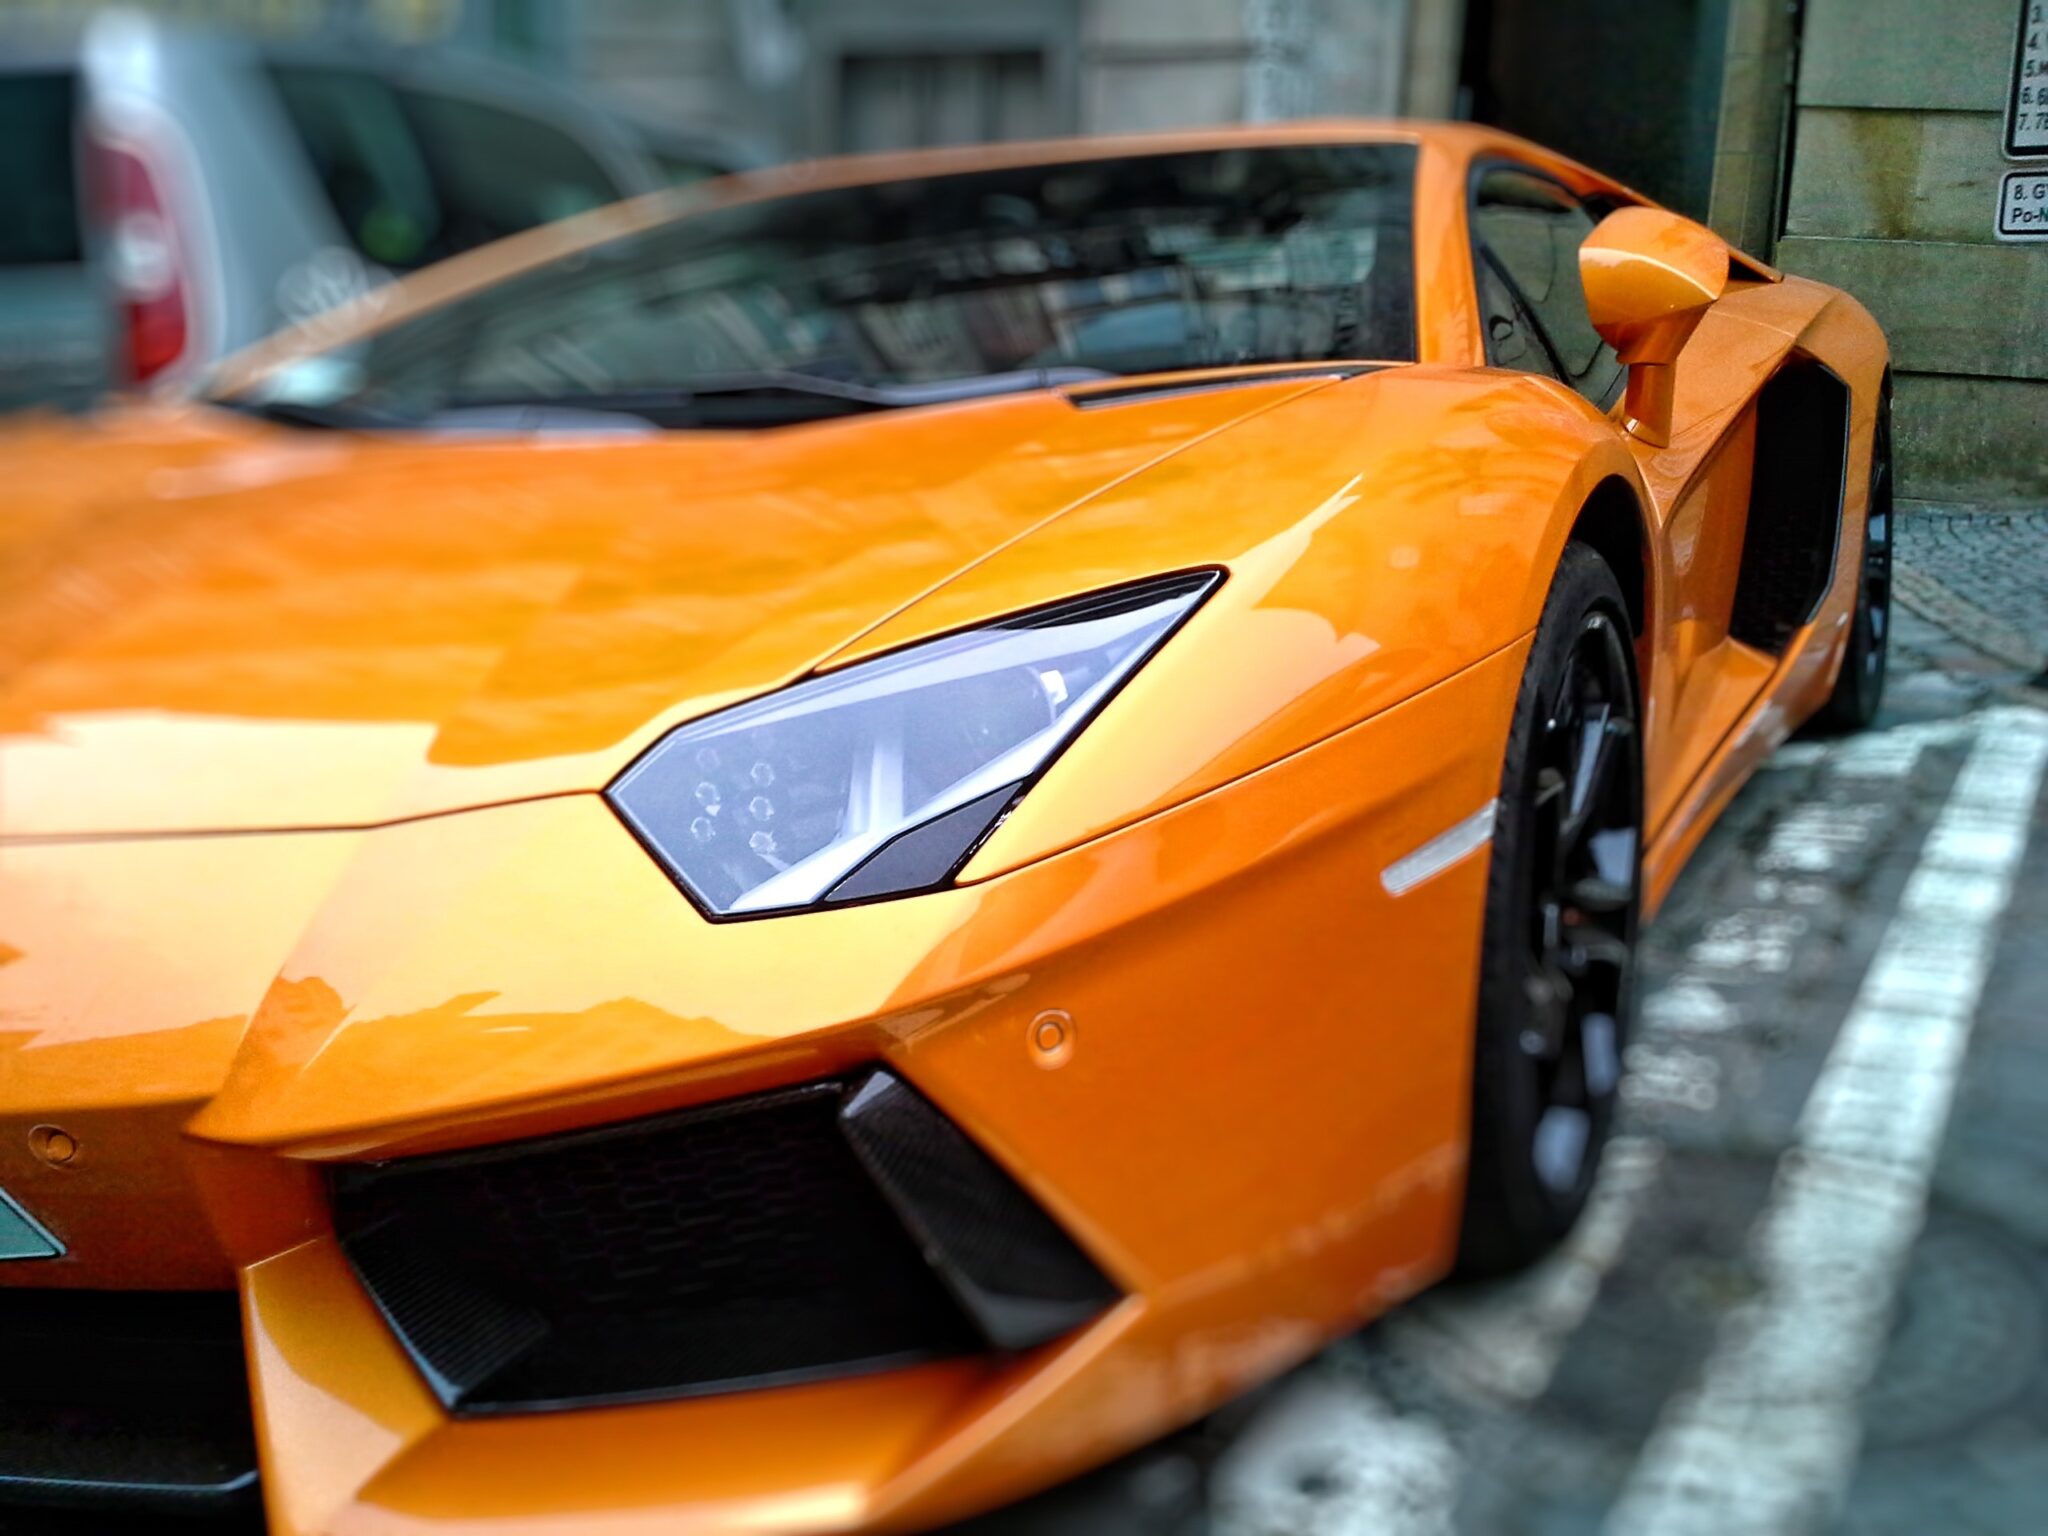 Top Reasons Why Paint Protection Film Is Worth the Investment